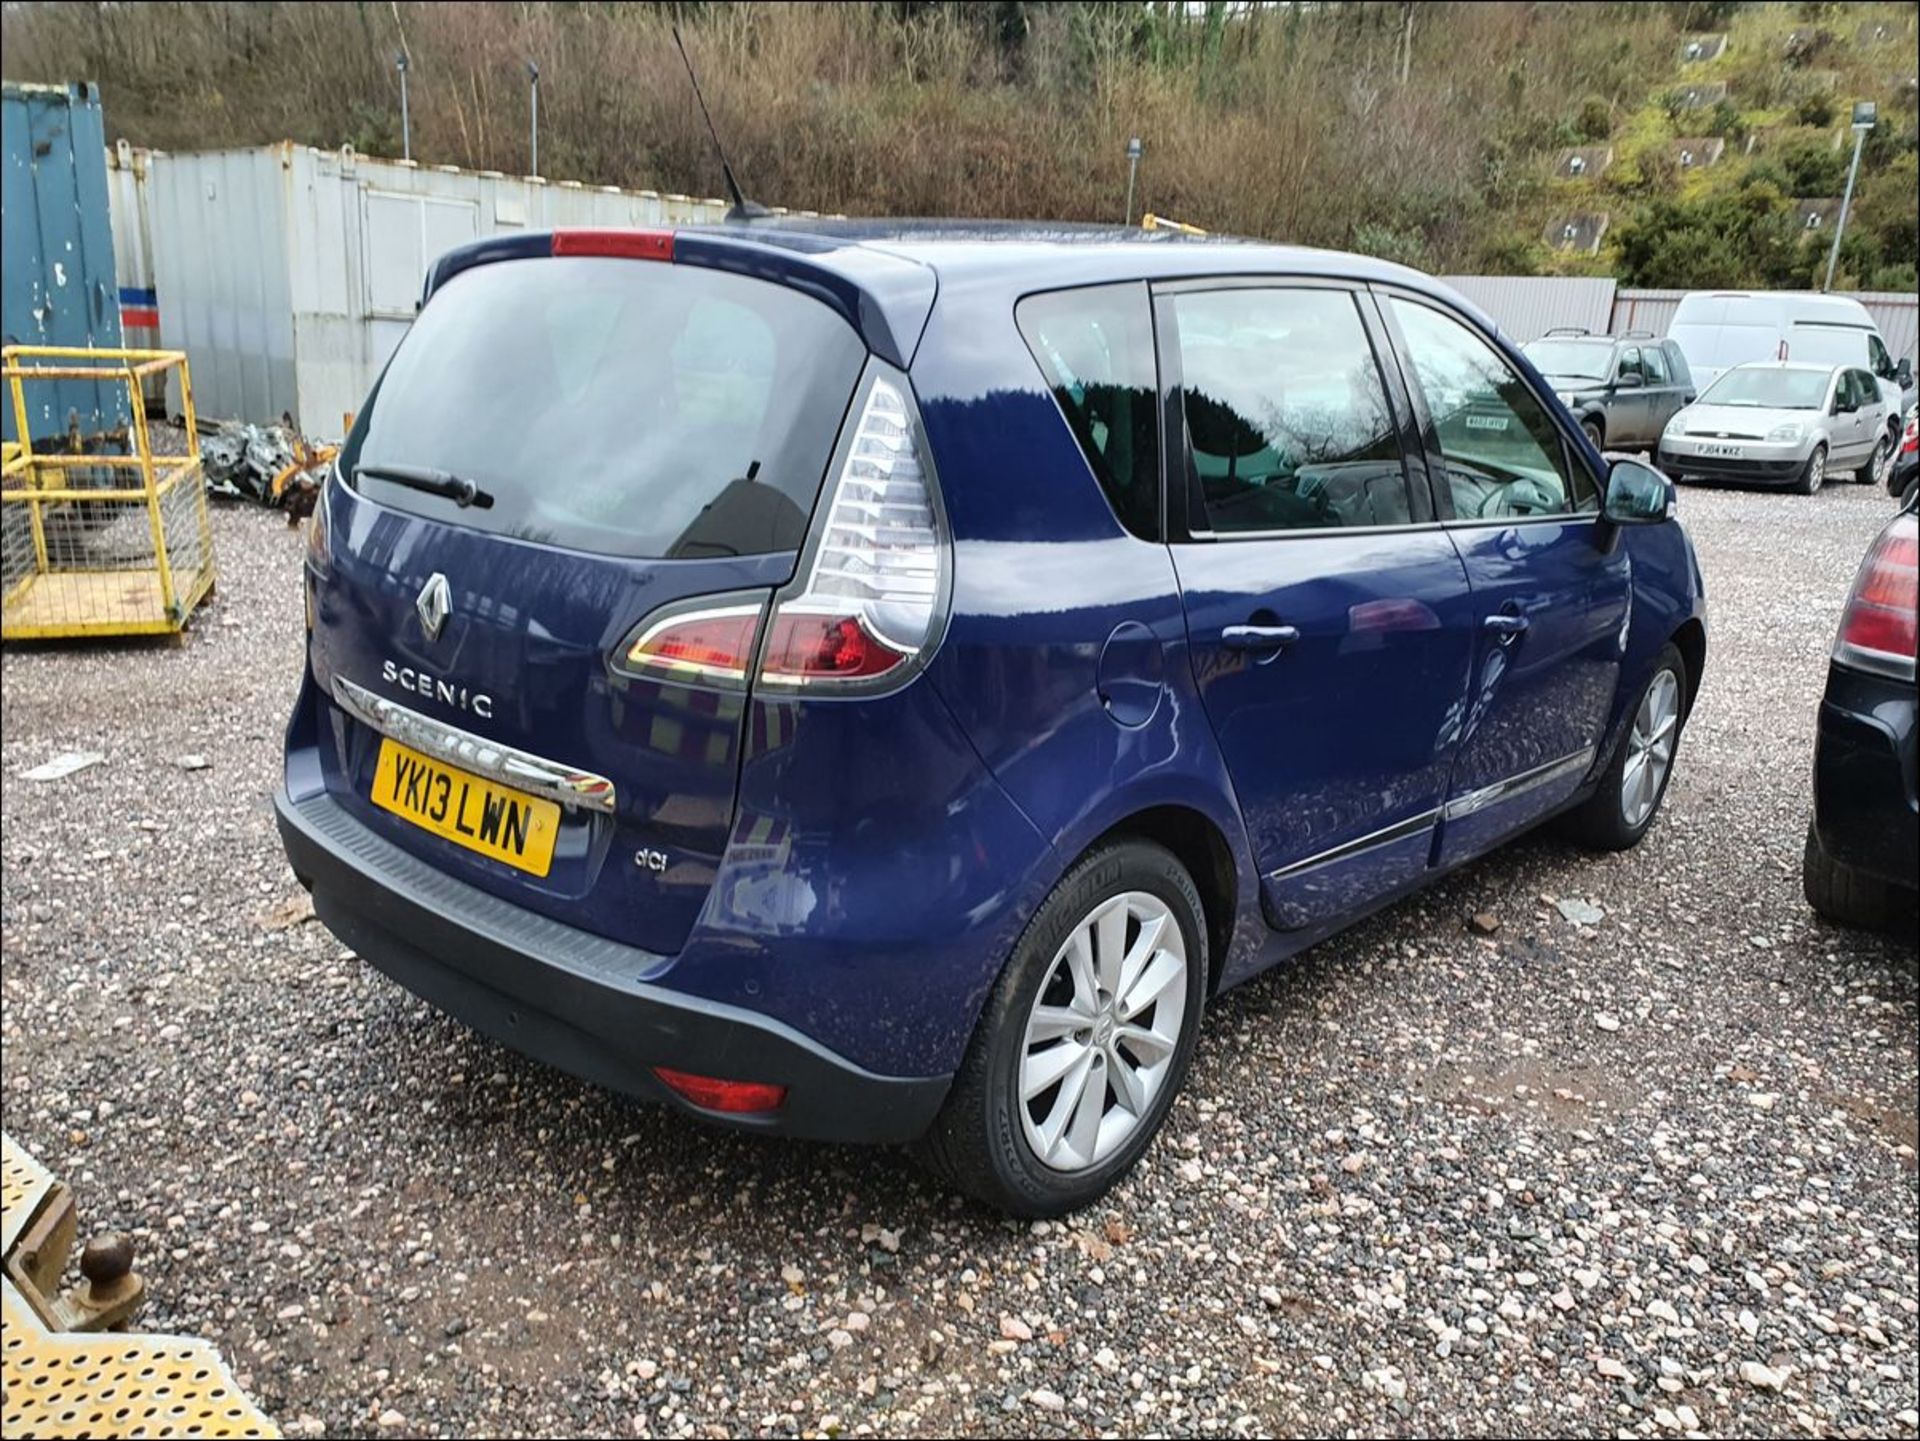 13/13 RENAULT SCENIC D-QUE TTLUXE NRG D - 1461cc 5dr MPV (Blue, 112k) - Image 7 of 11